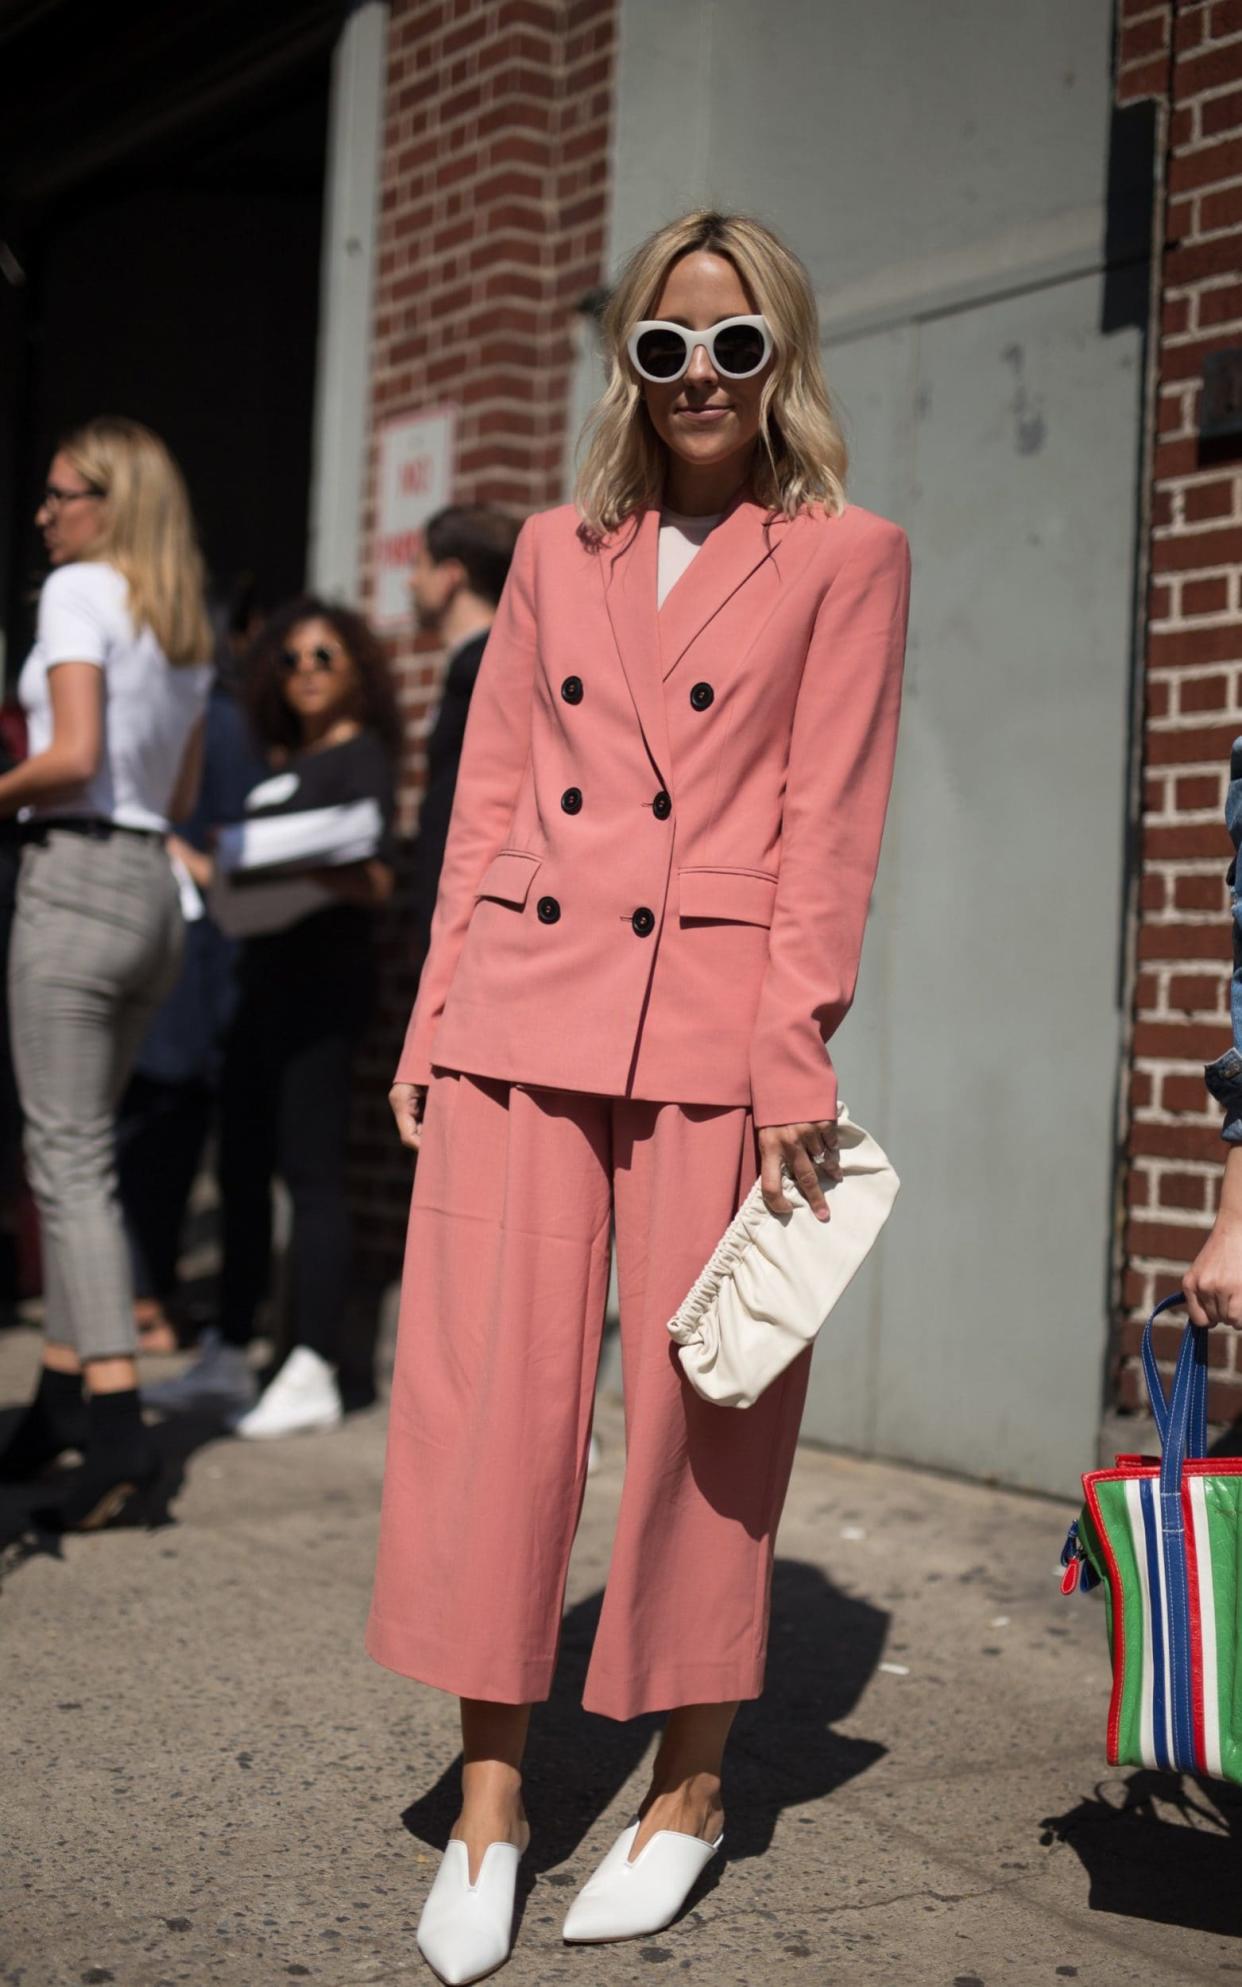 Jacey Duprie wearing pink at NYFW - Getty Images North America